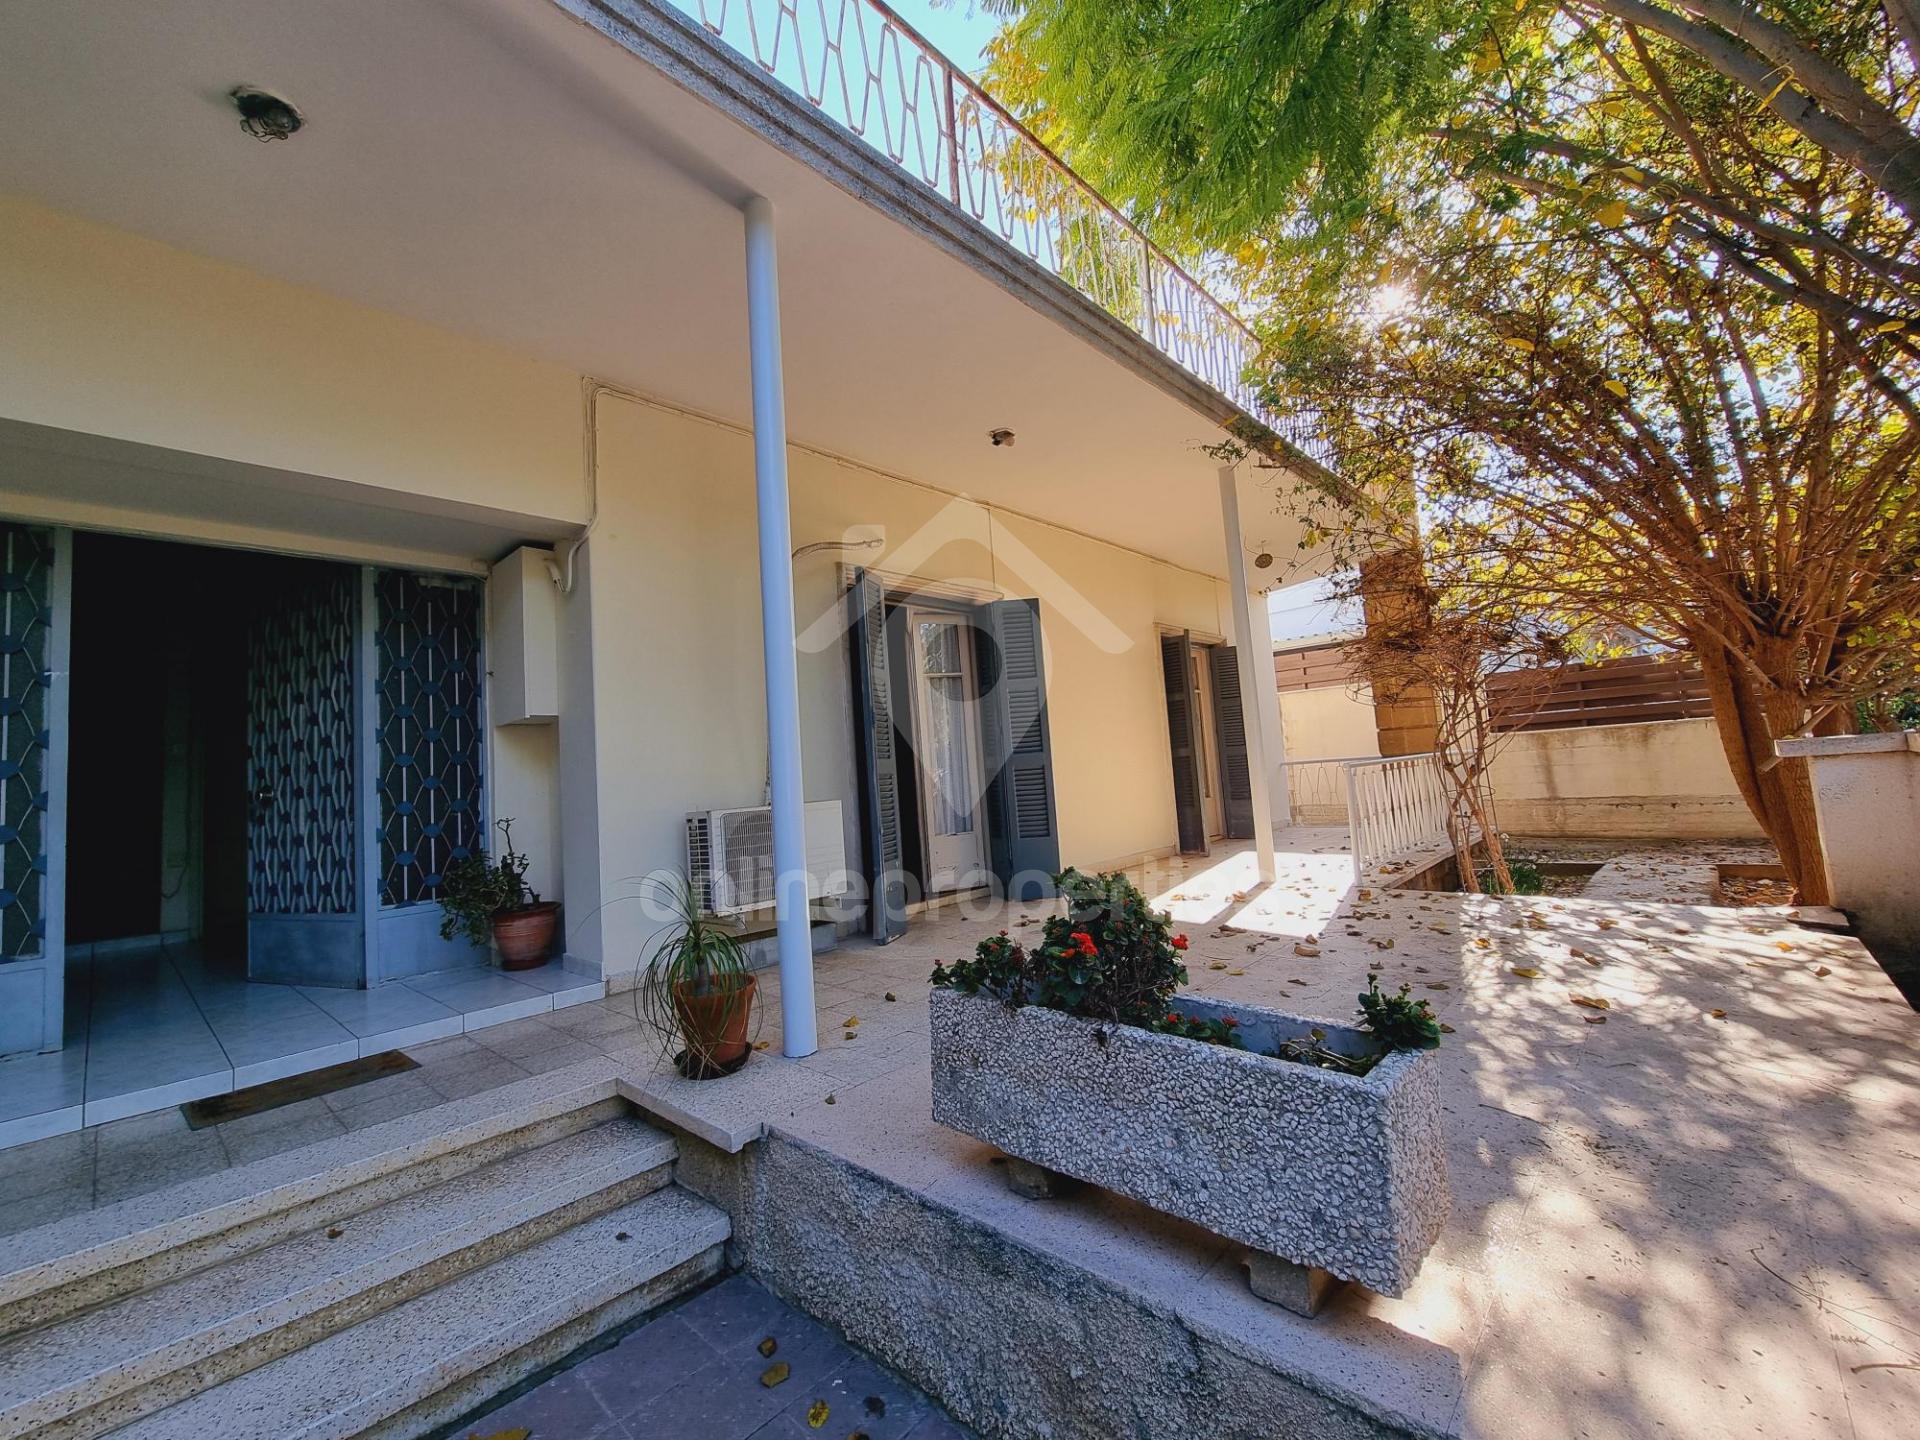 Ground floor house in Acropolis with great potential